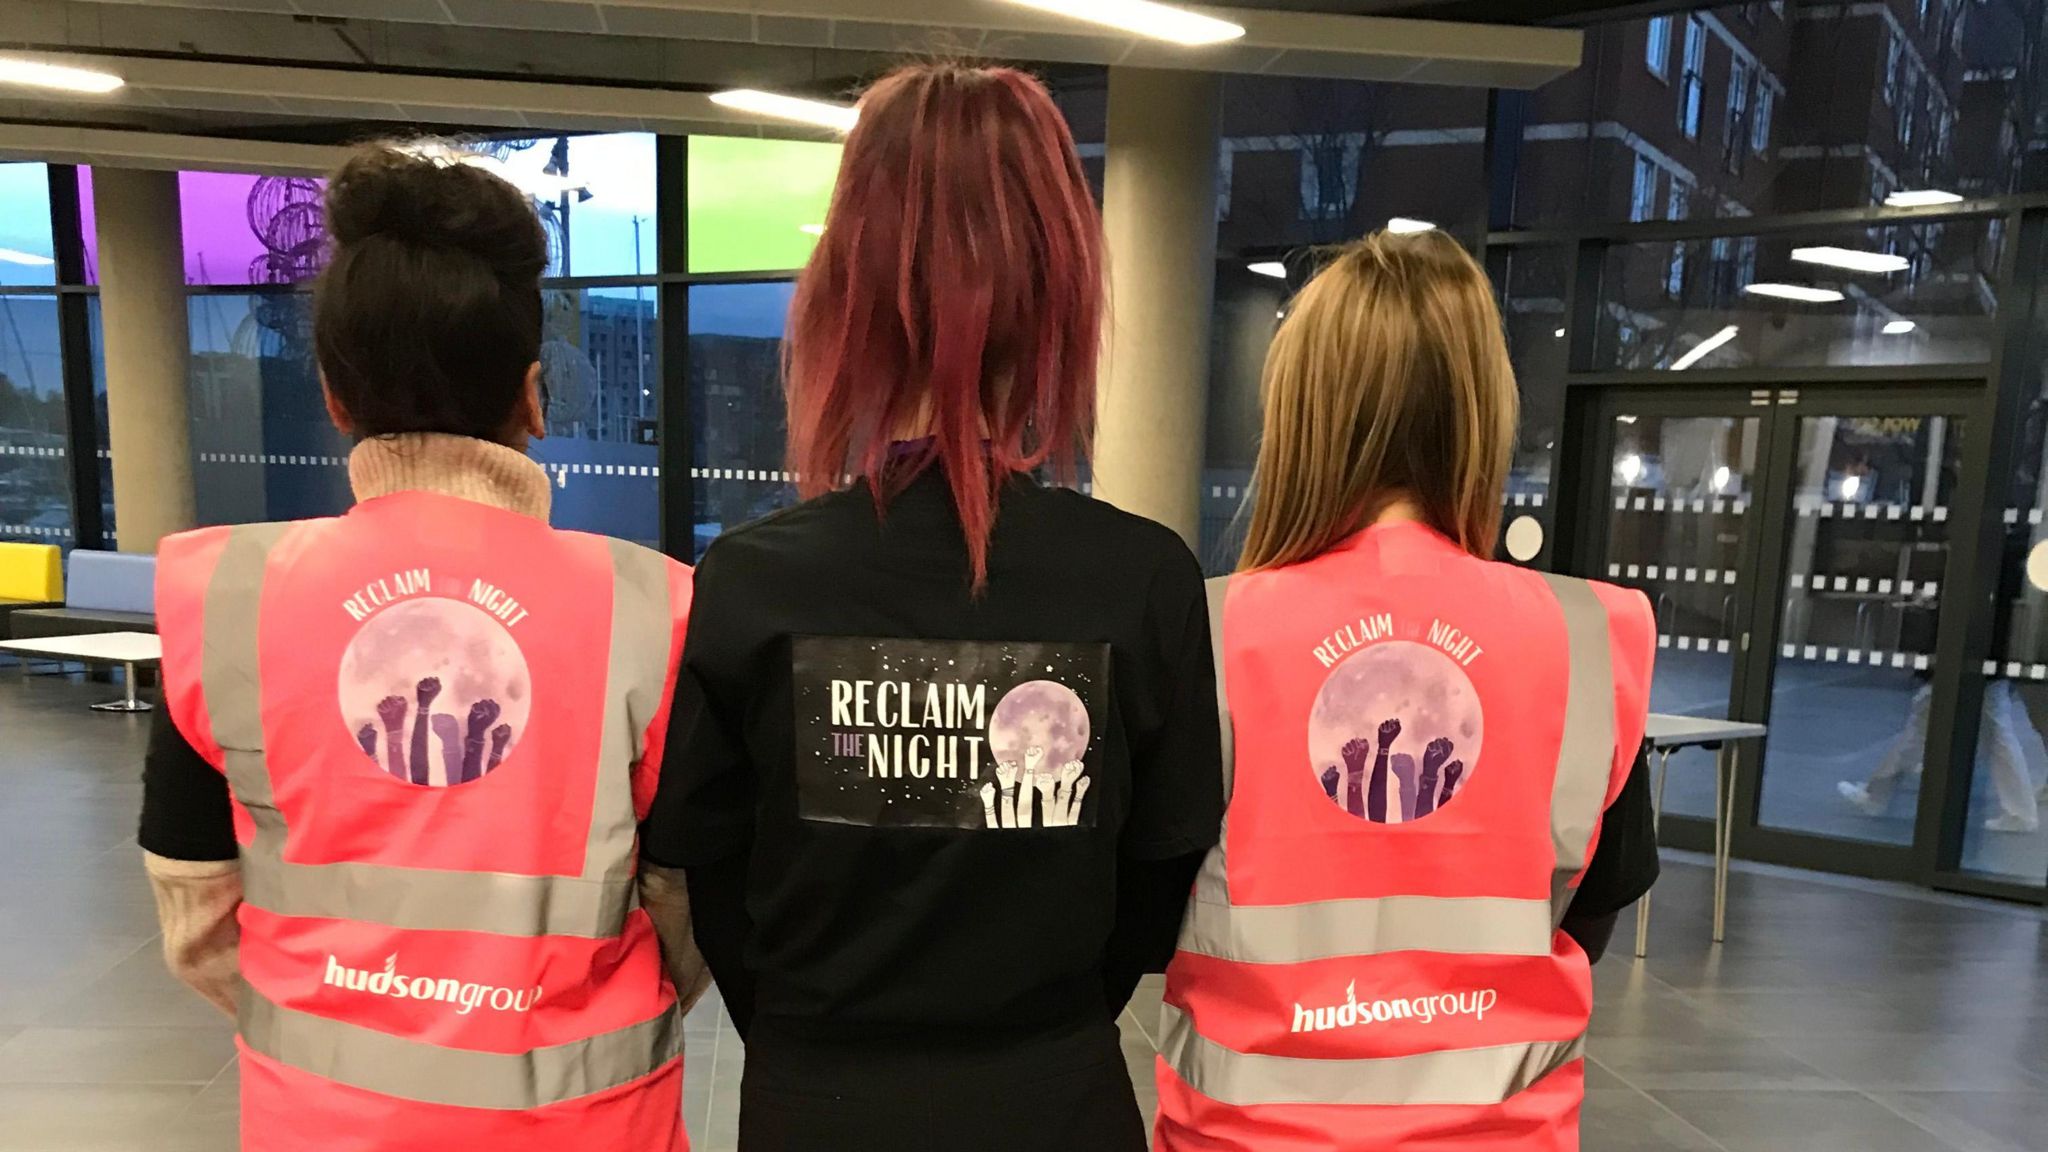 The Suffolk Rape Crisis during a reclaim the night event